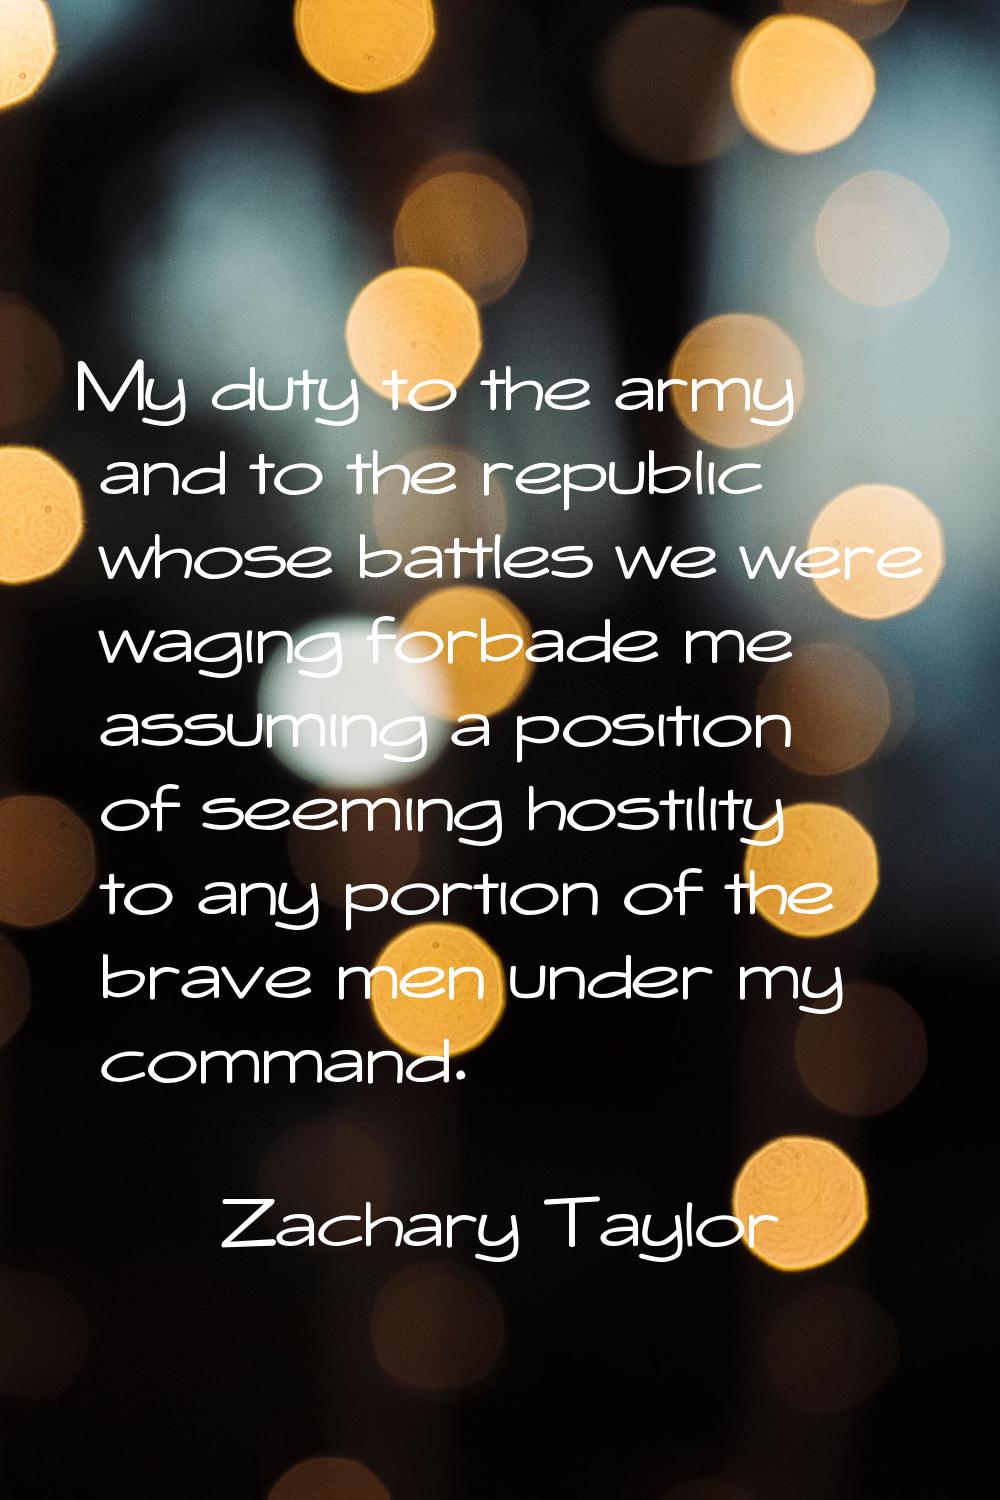 My duty to the army and to the republic whose battles we were waging forbade me assuming a position